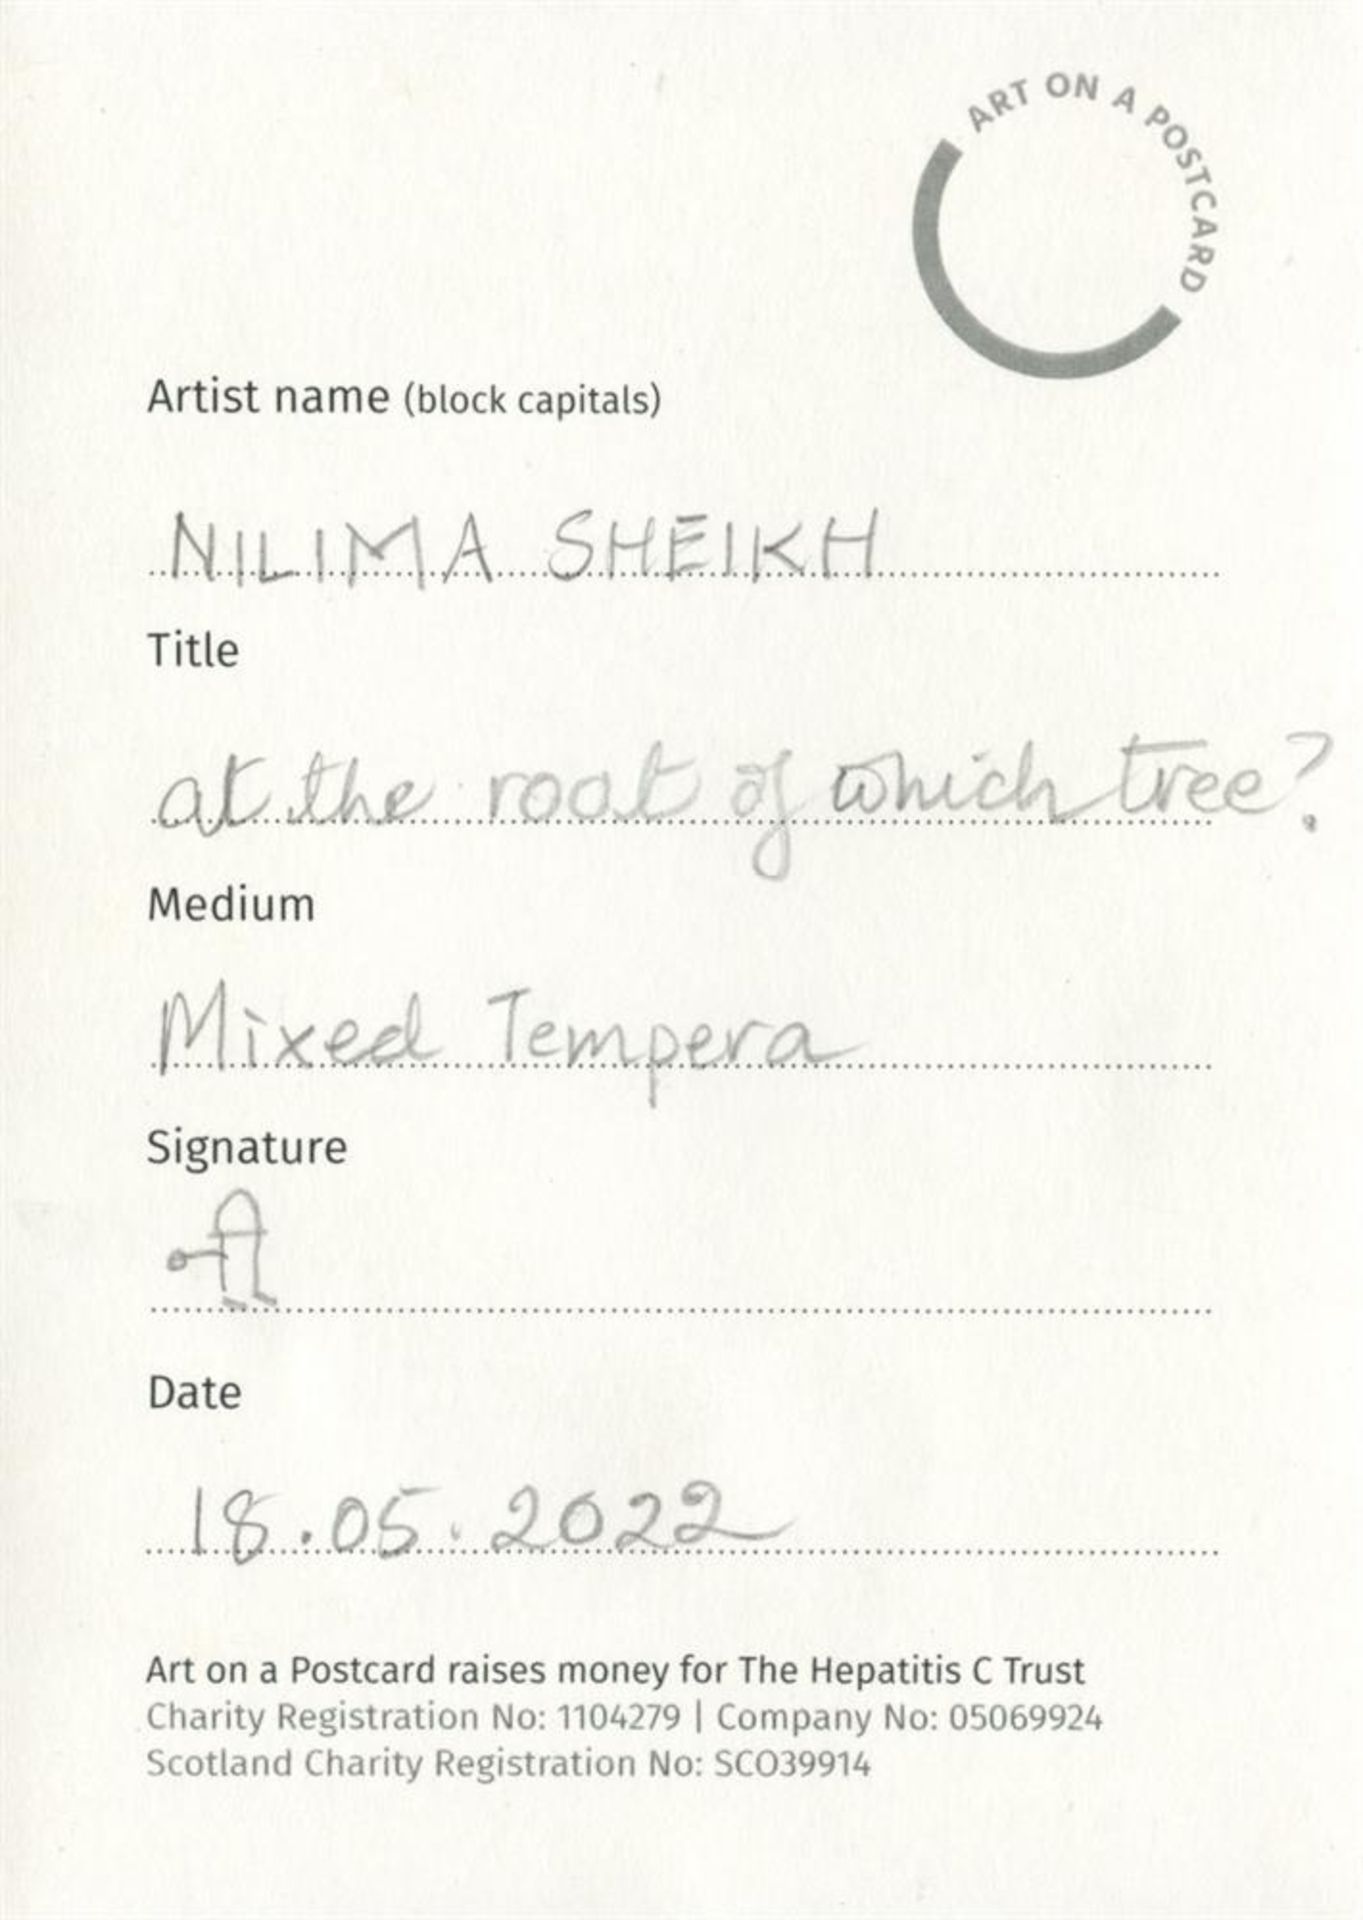 Nilima Sheikh, At The Root of Which Tree?, 2022 - Image 2 of 3